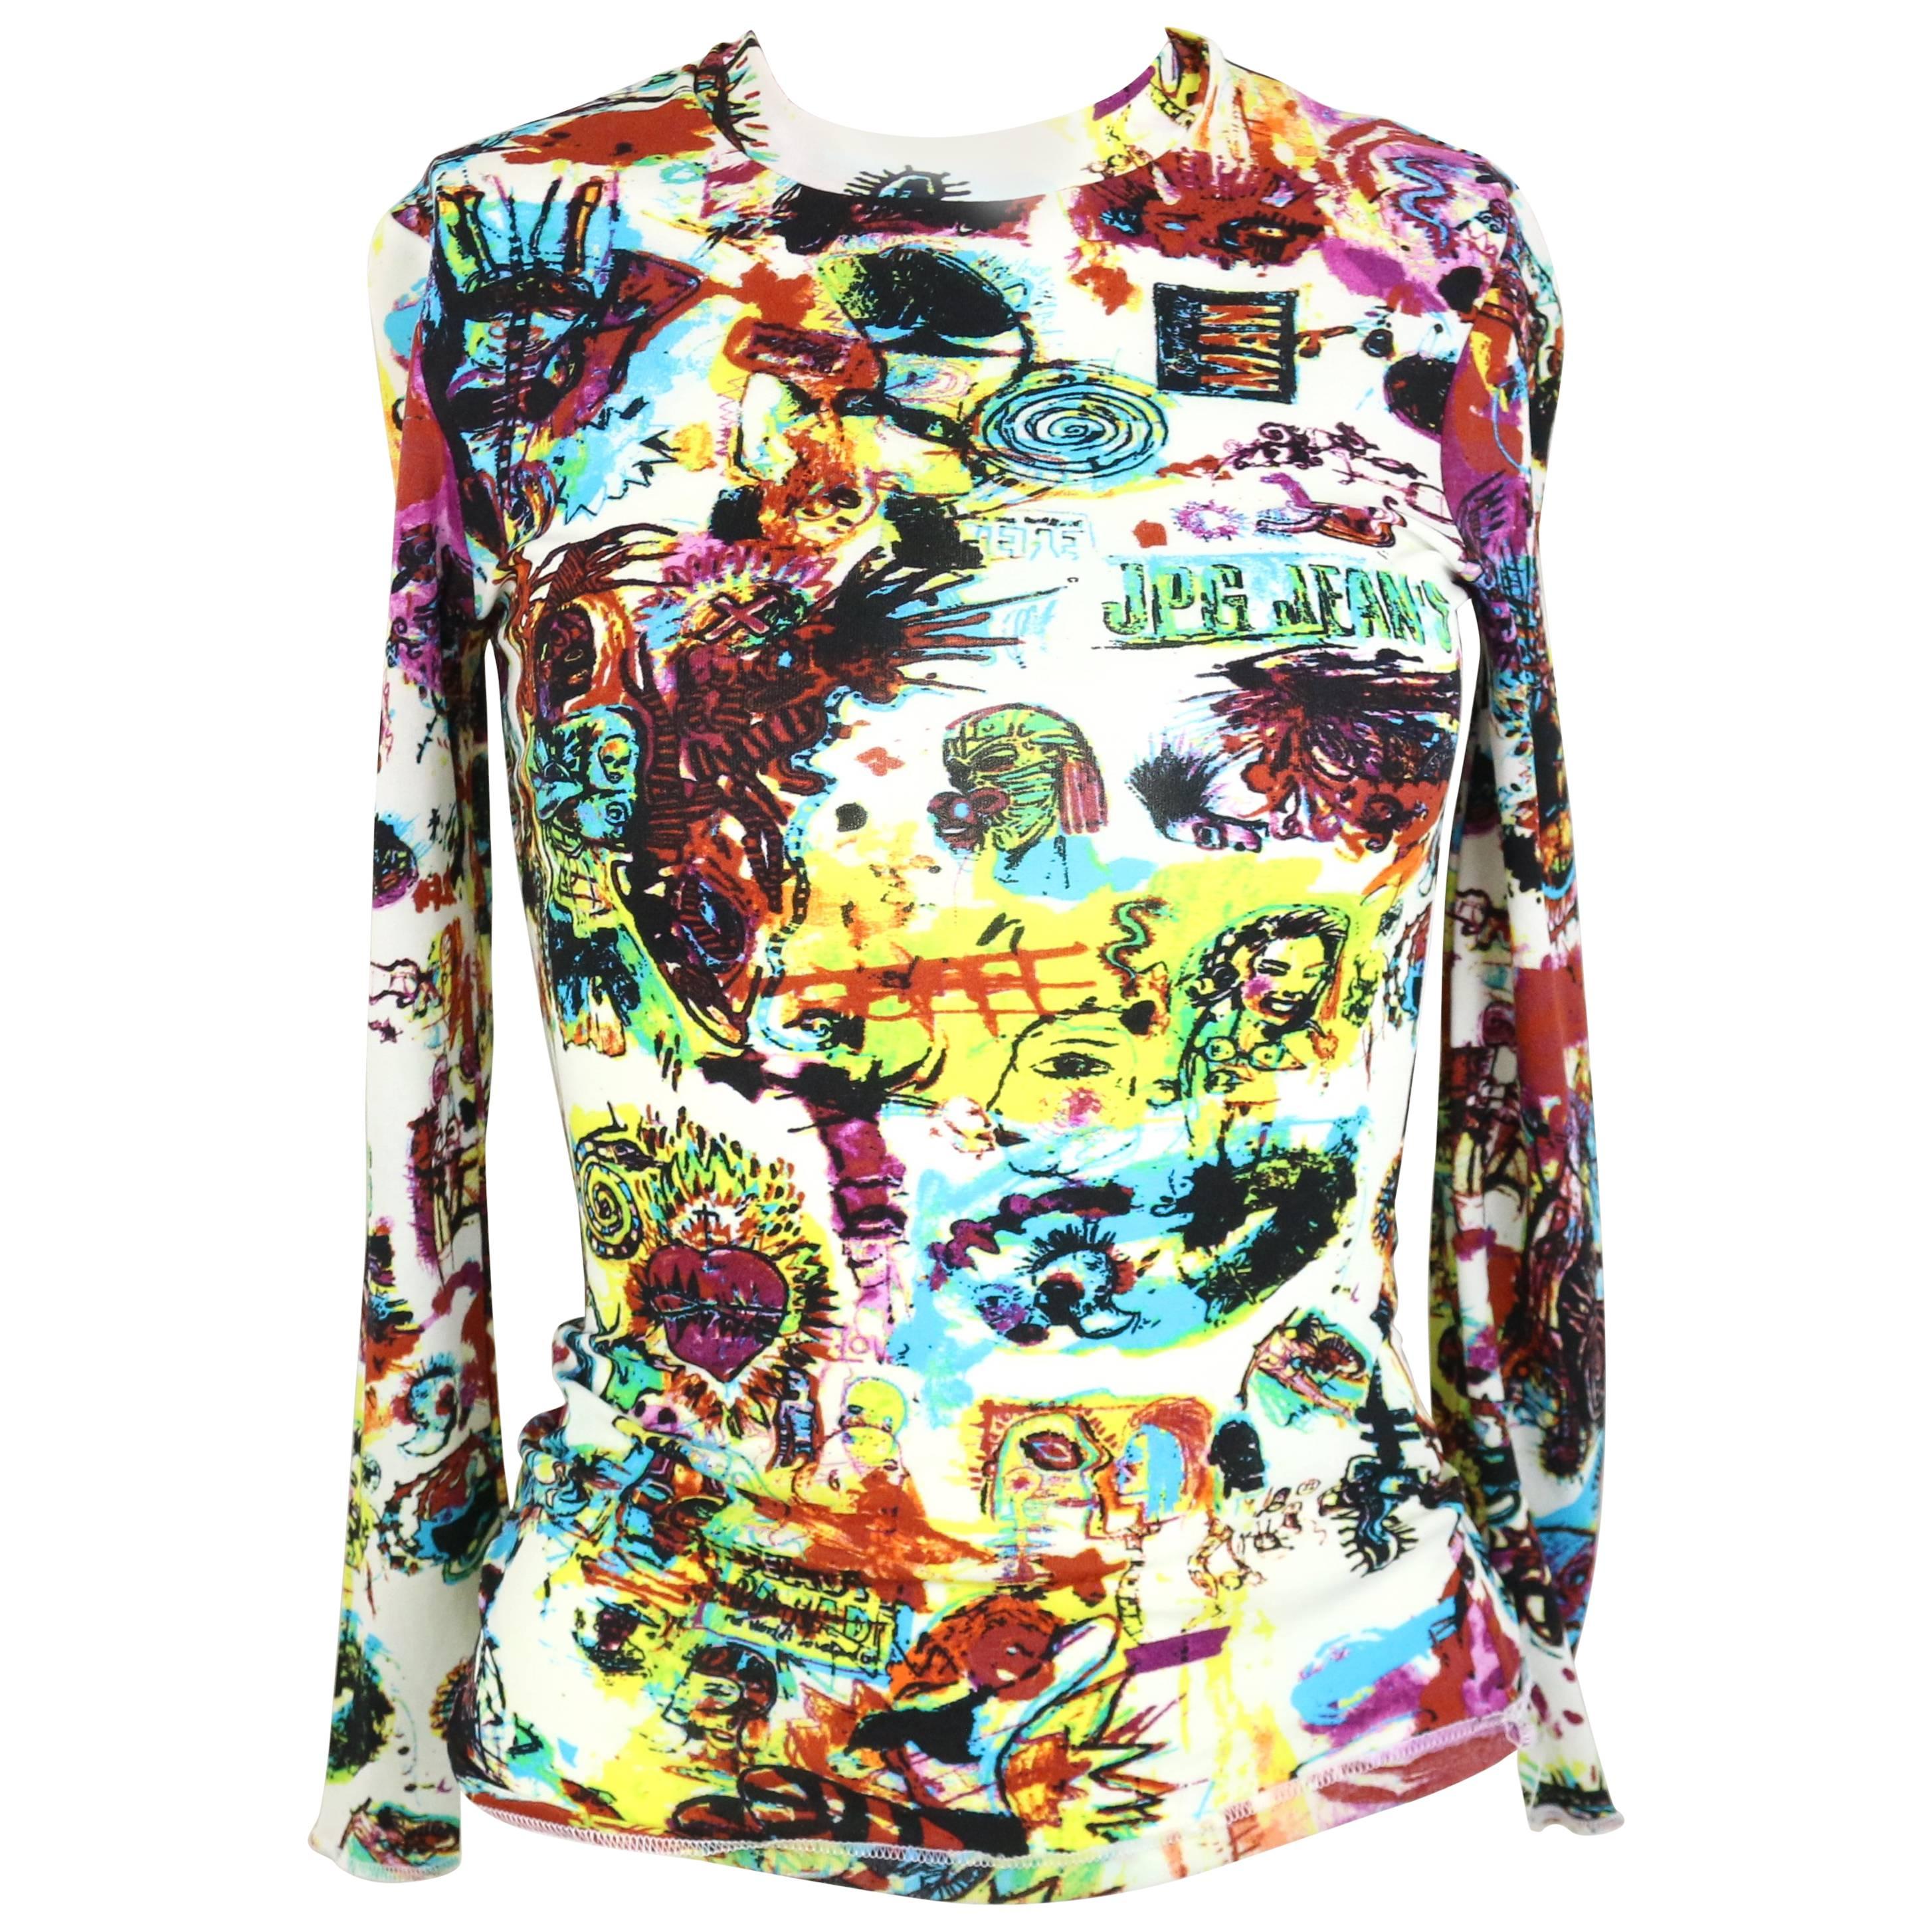 Jean Paul Gaultier Jeans Colourful Print White Long Sleeves T-Shirt